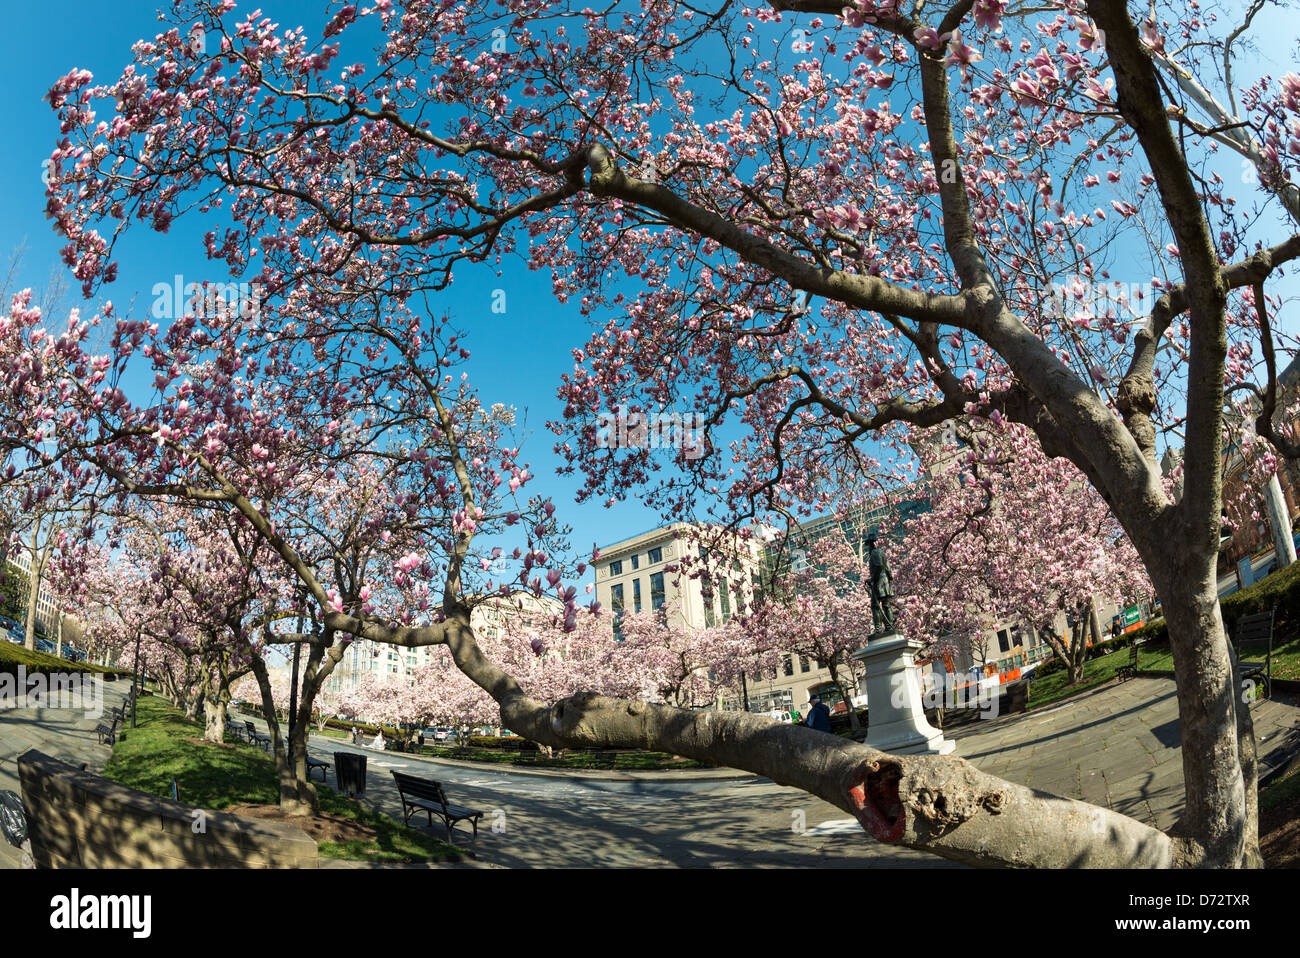 WASHINGTON DC, USA - Tulip Magnolias in spring bloom in Rawlins Park in northwest Washington DC. The statue from which the park gets its name is of Major General John A. Rawlins, advisor to Ulysses S. Grant. Stock Photo